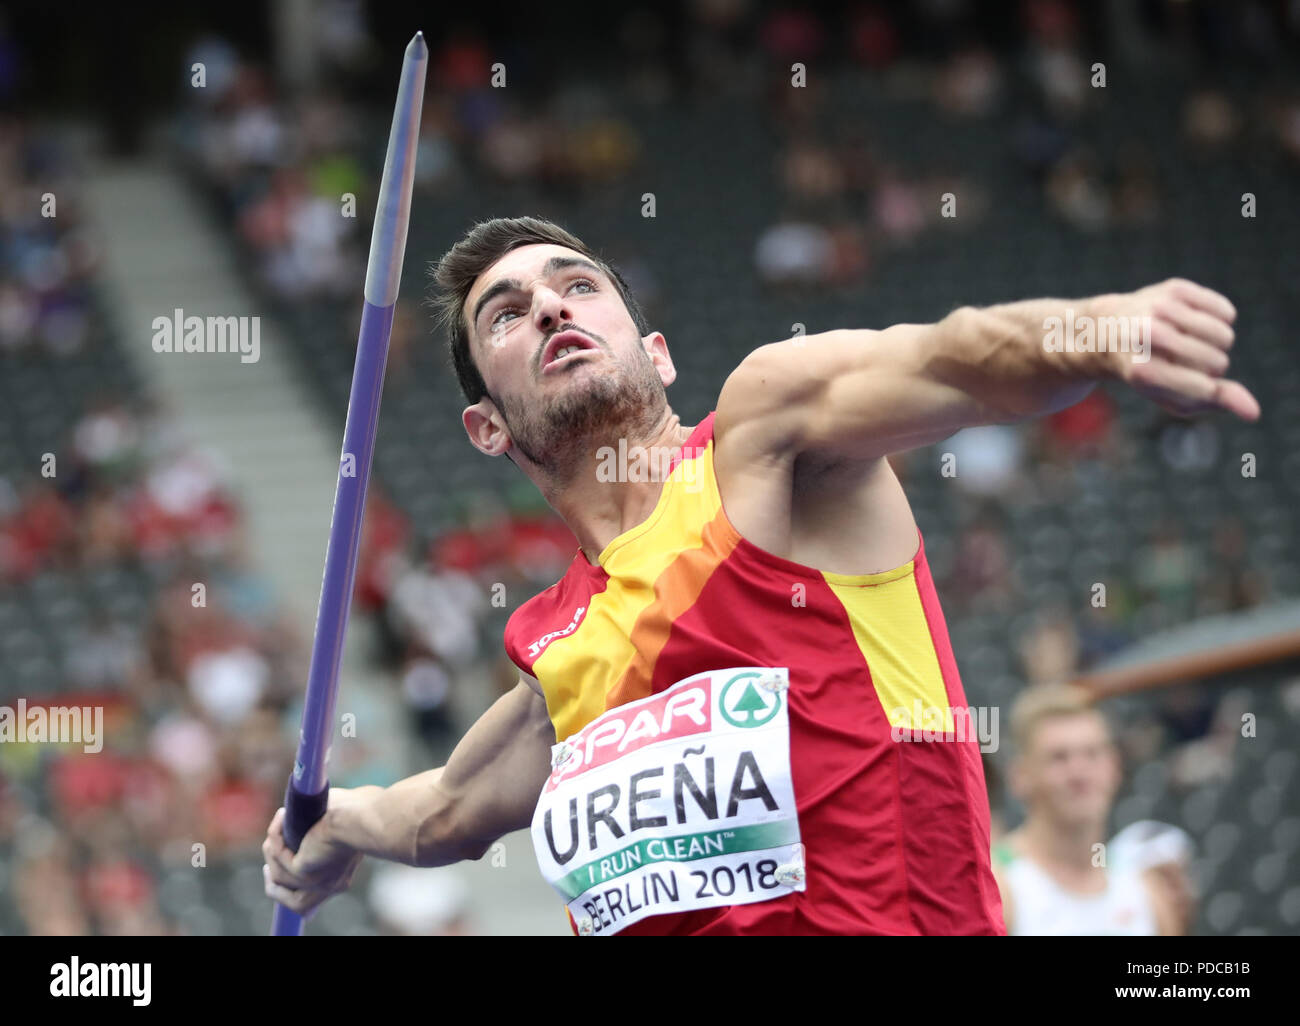 Berlin, Germany. 08th Aug, 2018. Athletics, European Championships in the Olympic Stadium: Decathlon, javelin, men, Jorge Urena from Spain in action. Credit: Michael Kappeler/dpa/Alamy Live News Stock Photo